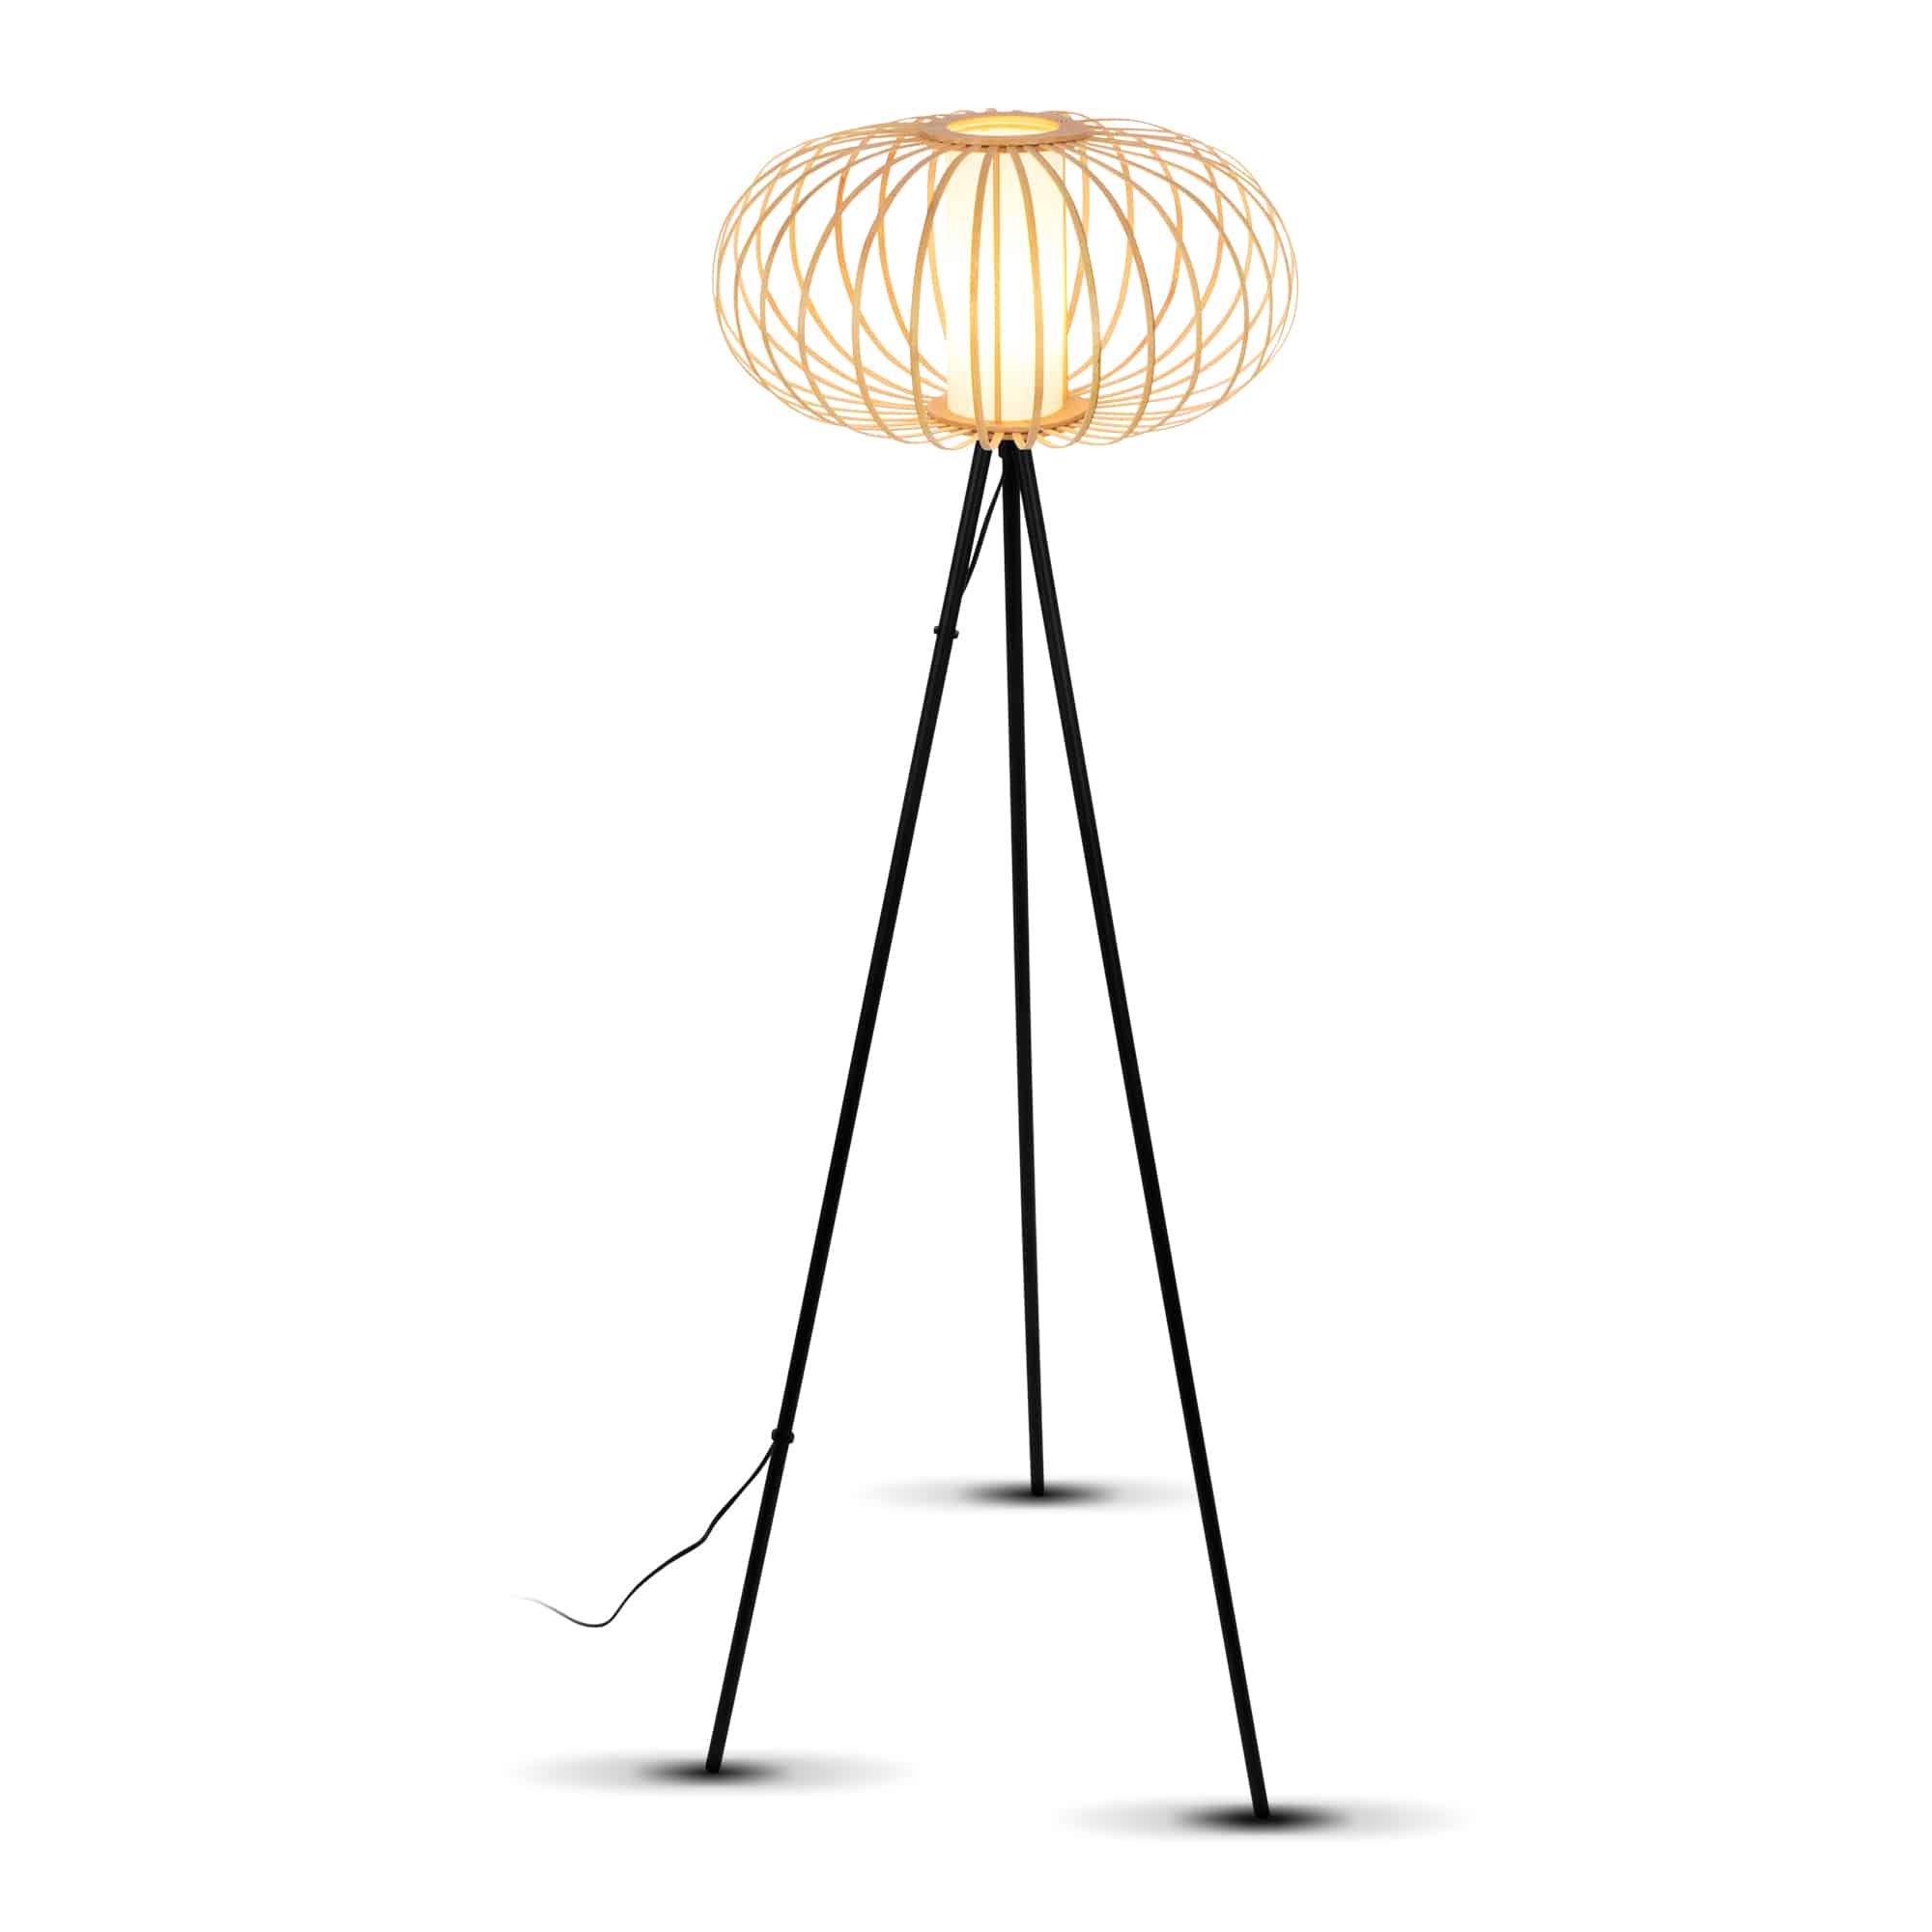 Standing lamp, 153 cm, 1x E27, max. 10W, wooden colors